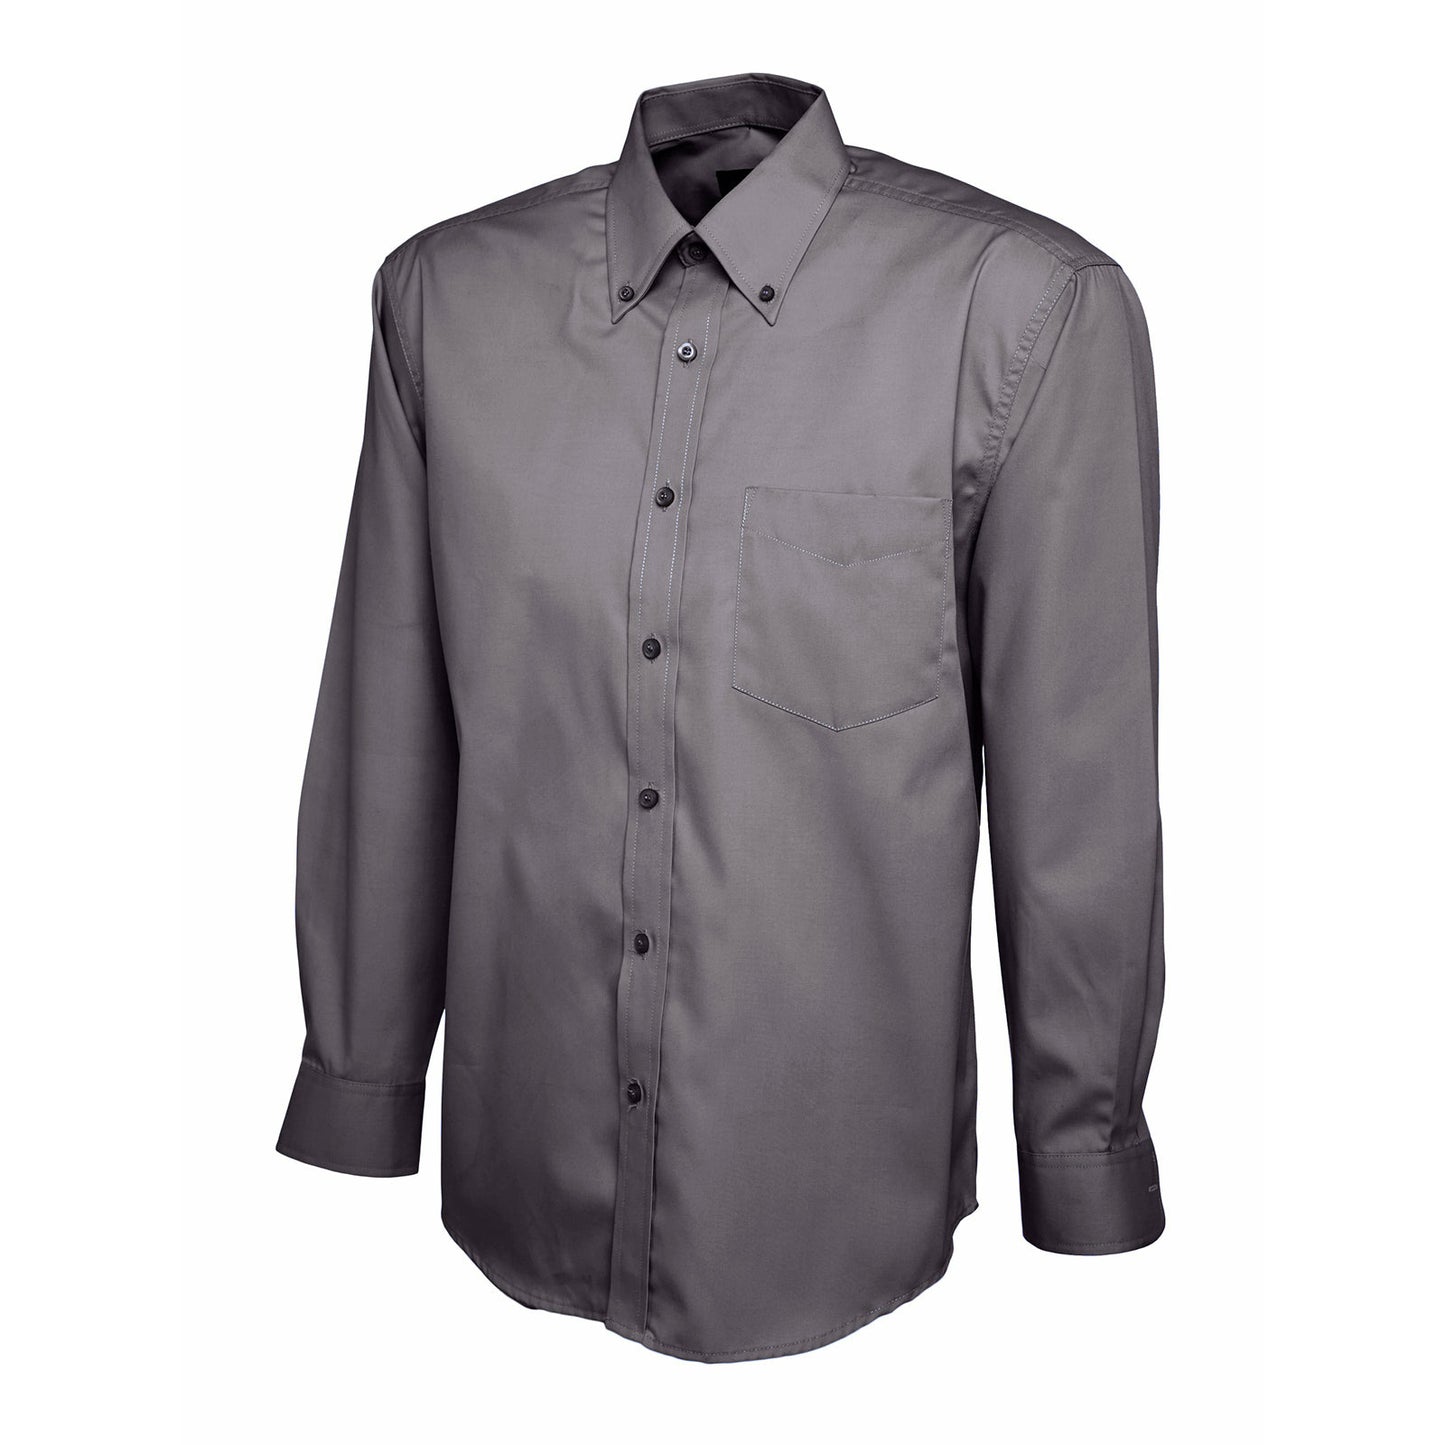 Mens Pinpoint Oxford Full Sleeve Shirt - Charcoal